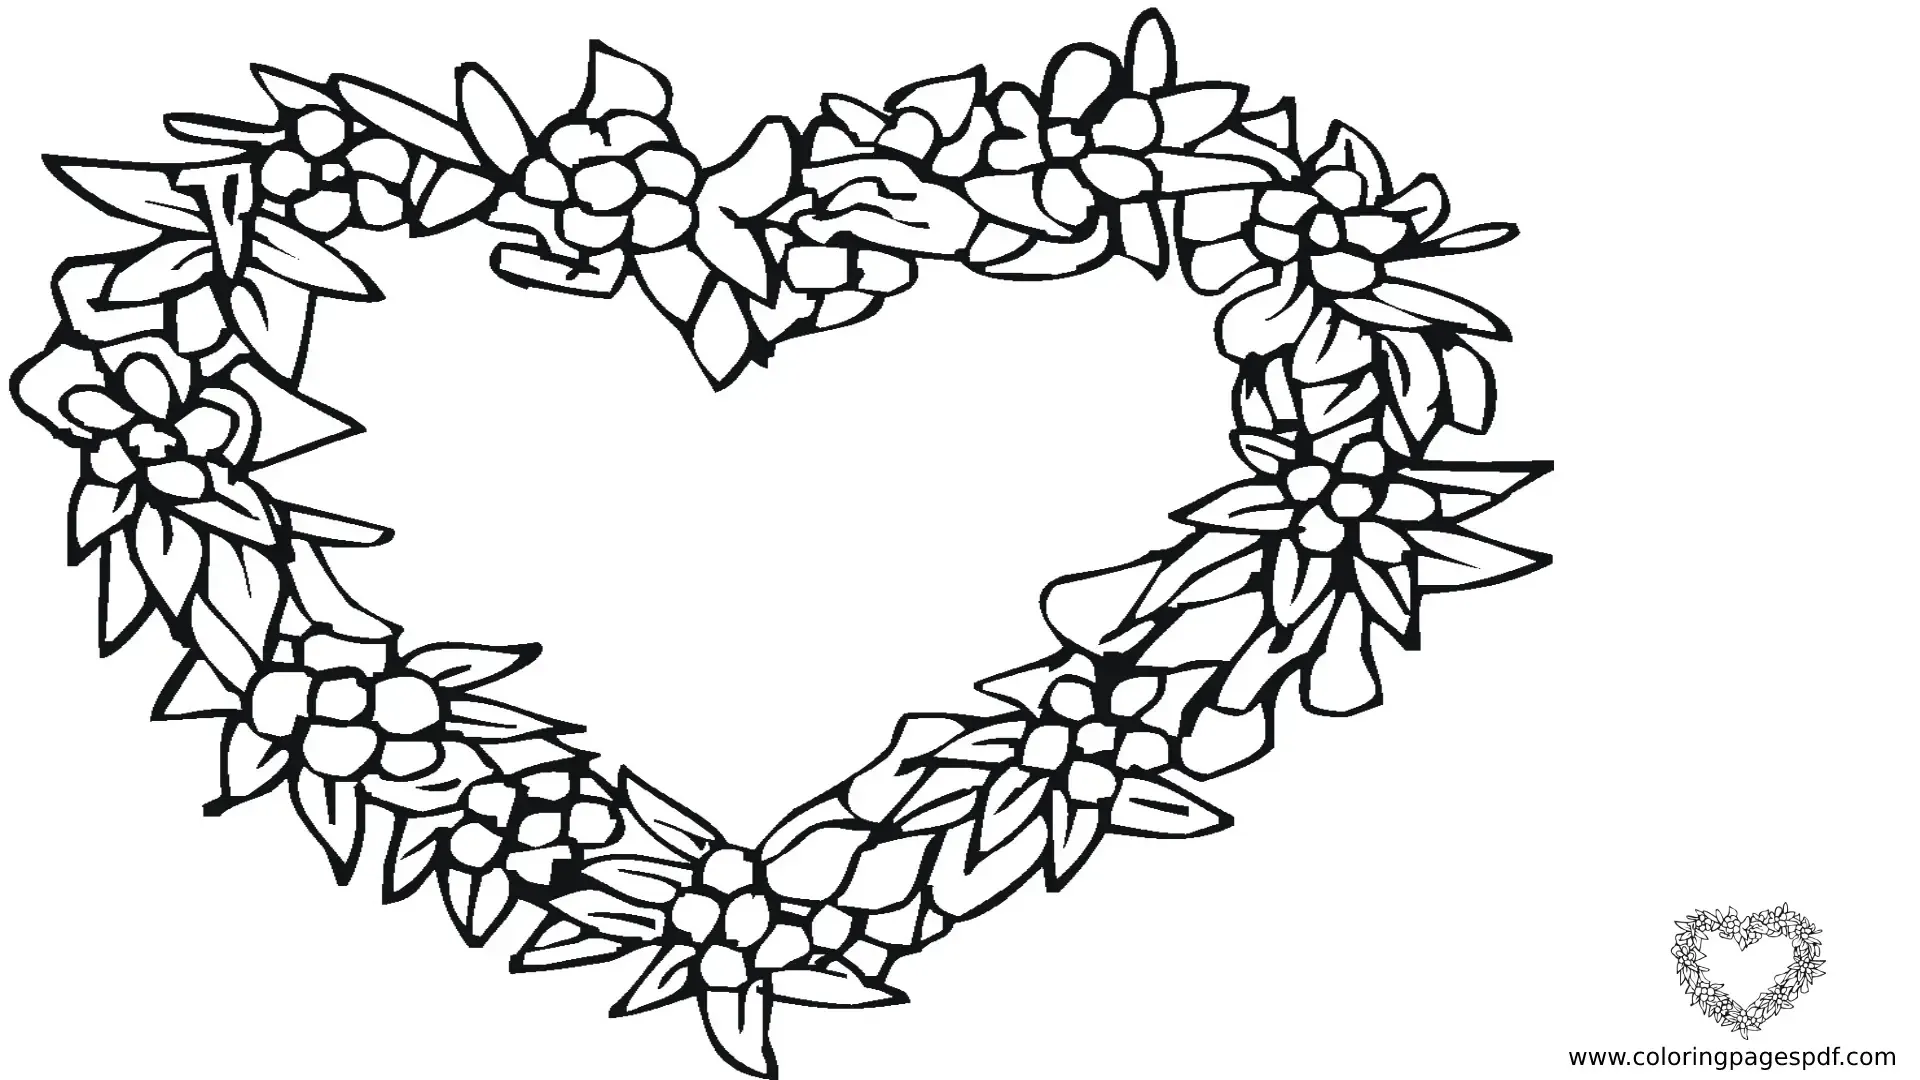 Coloring Pages Of A Heart Made Of Plants